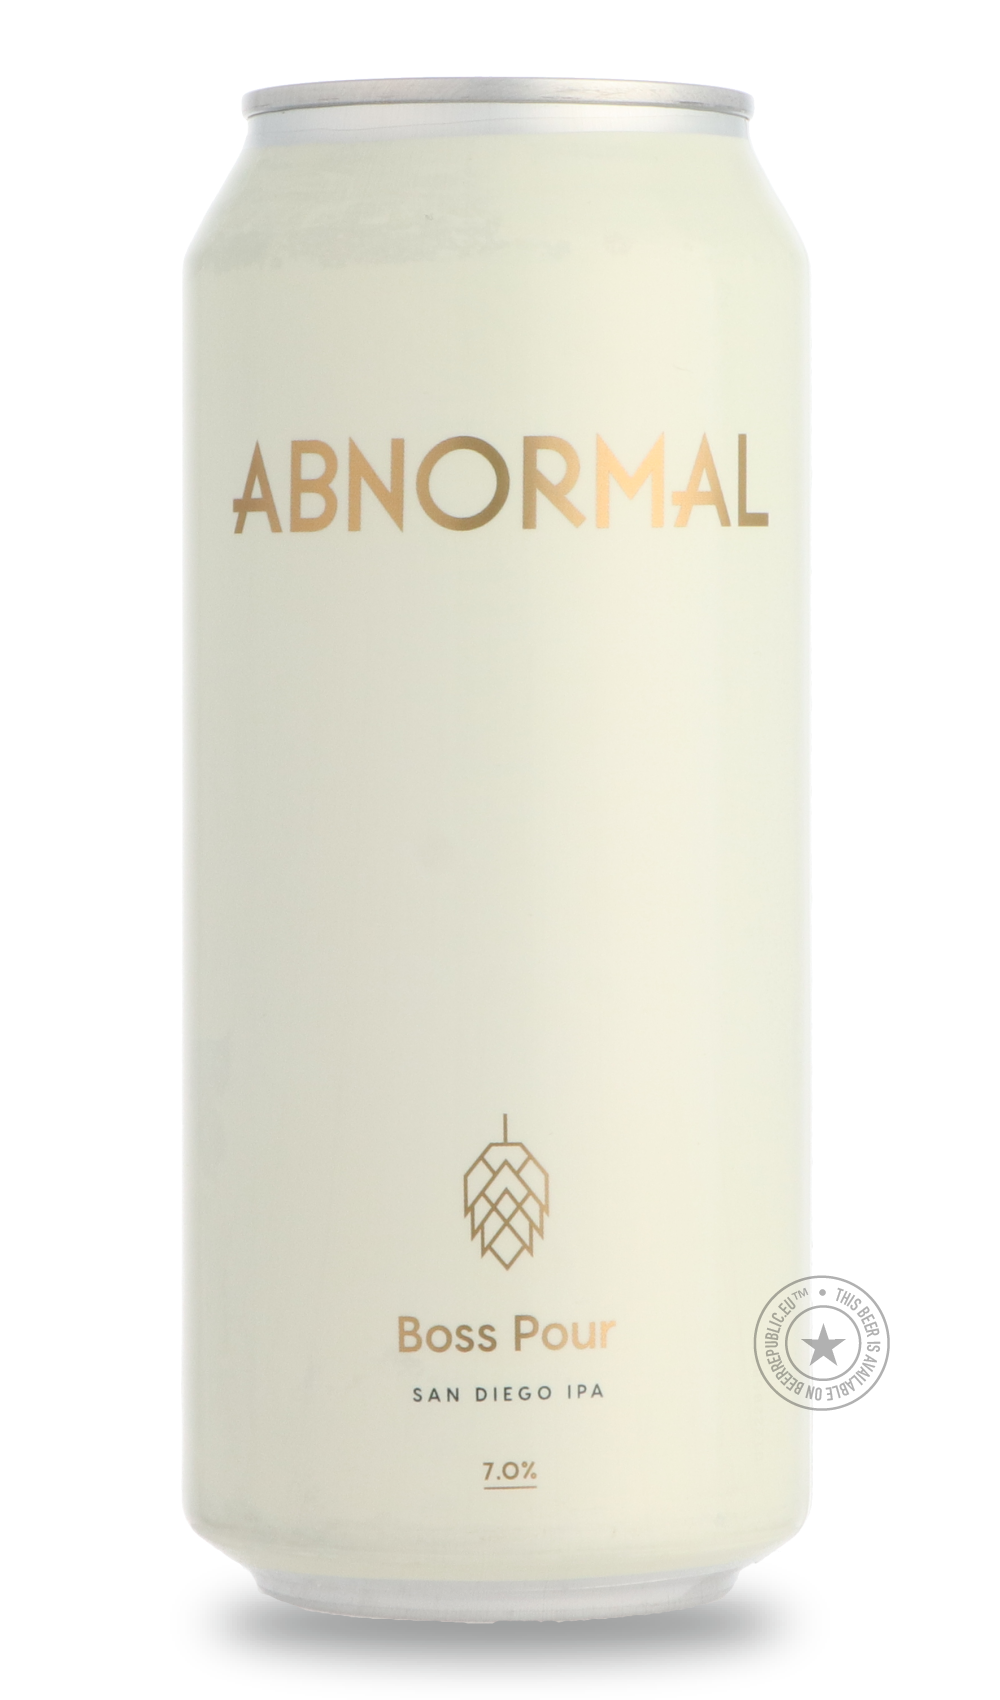 -Abnormal- Boss Pour-IPA- Only @ Beer Republic - The best online beer store for American & Canadian craft beer - Buy beer online from the USA and Canada - Bier online kopen - Amerikaans bier kopen - Craft beer store - Craft beer kopen - Amerikanisch bier kaufen - Bier online kaufen - Acheter biere online - IPA - Stout - Porter - New England IPA - Hazy IPA - Imperial Stout - Barrel Aged - Barrel Aged Imperial Stout - Brown - Dark beer - Blond - Blonde - Pilsner - Lager - Wheat - Weizen - Amber - Barley Wine 